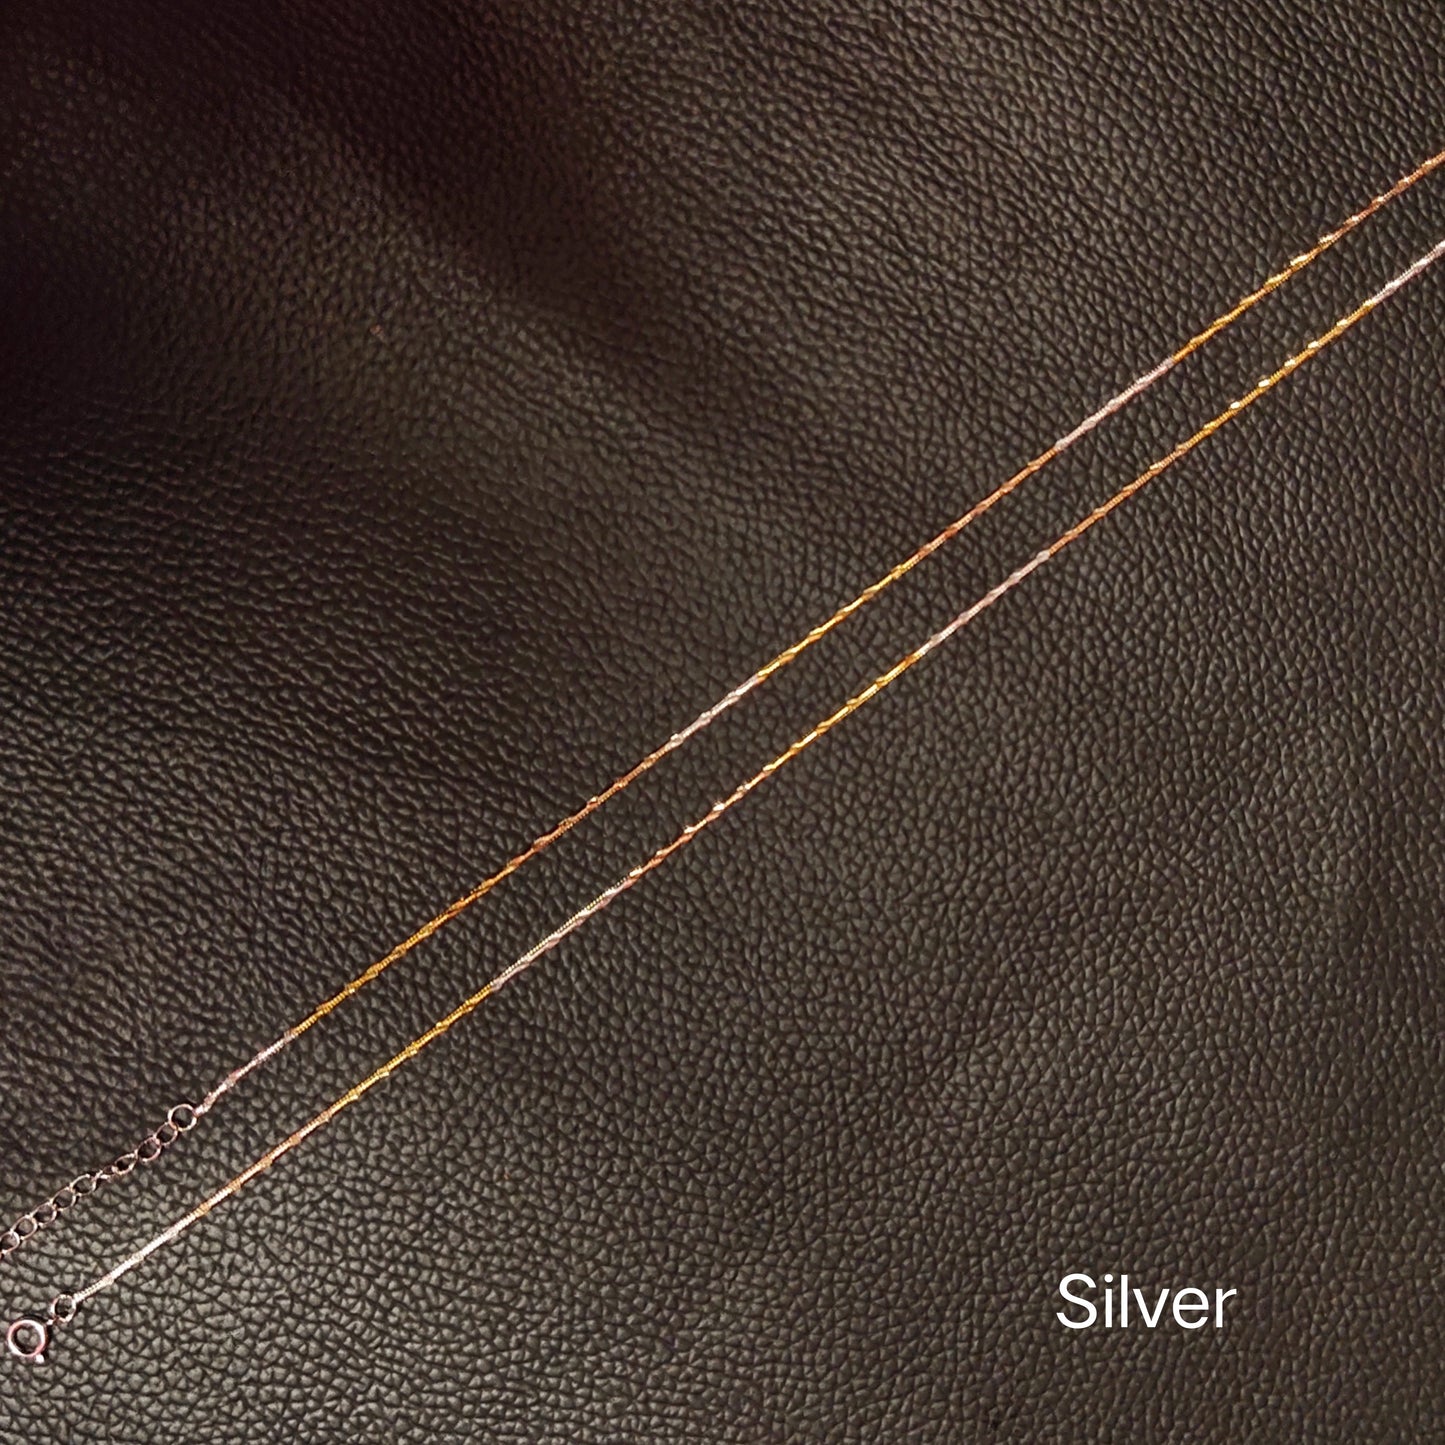 Embrace Style with ASP Silver's Dazzling Triple Tone 925 Silver Anklet